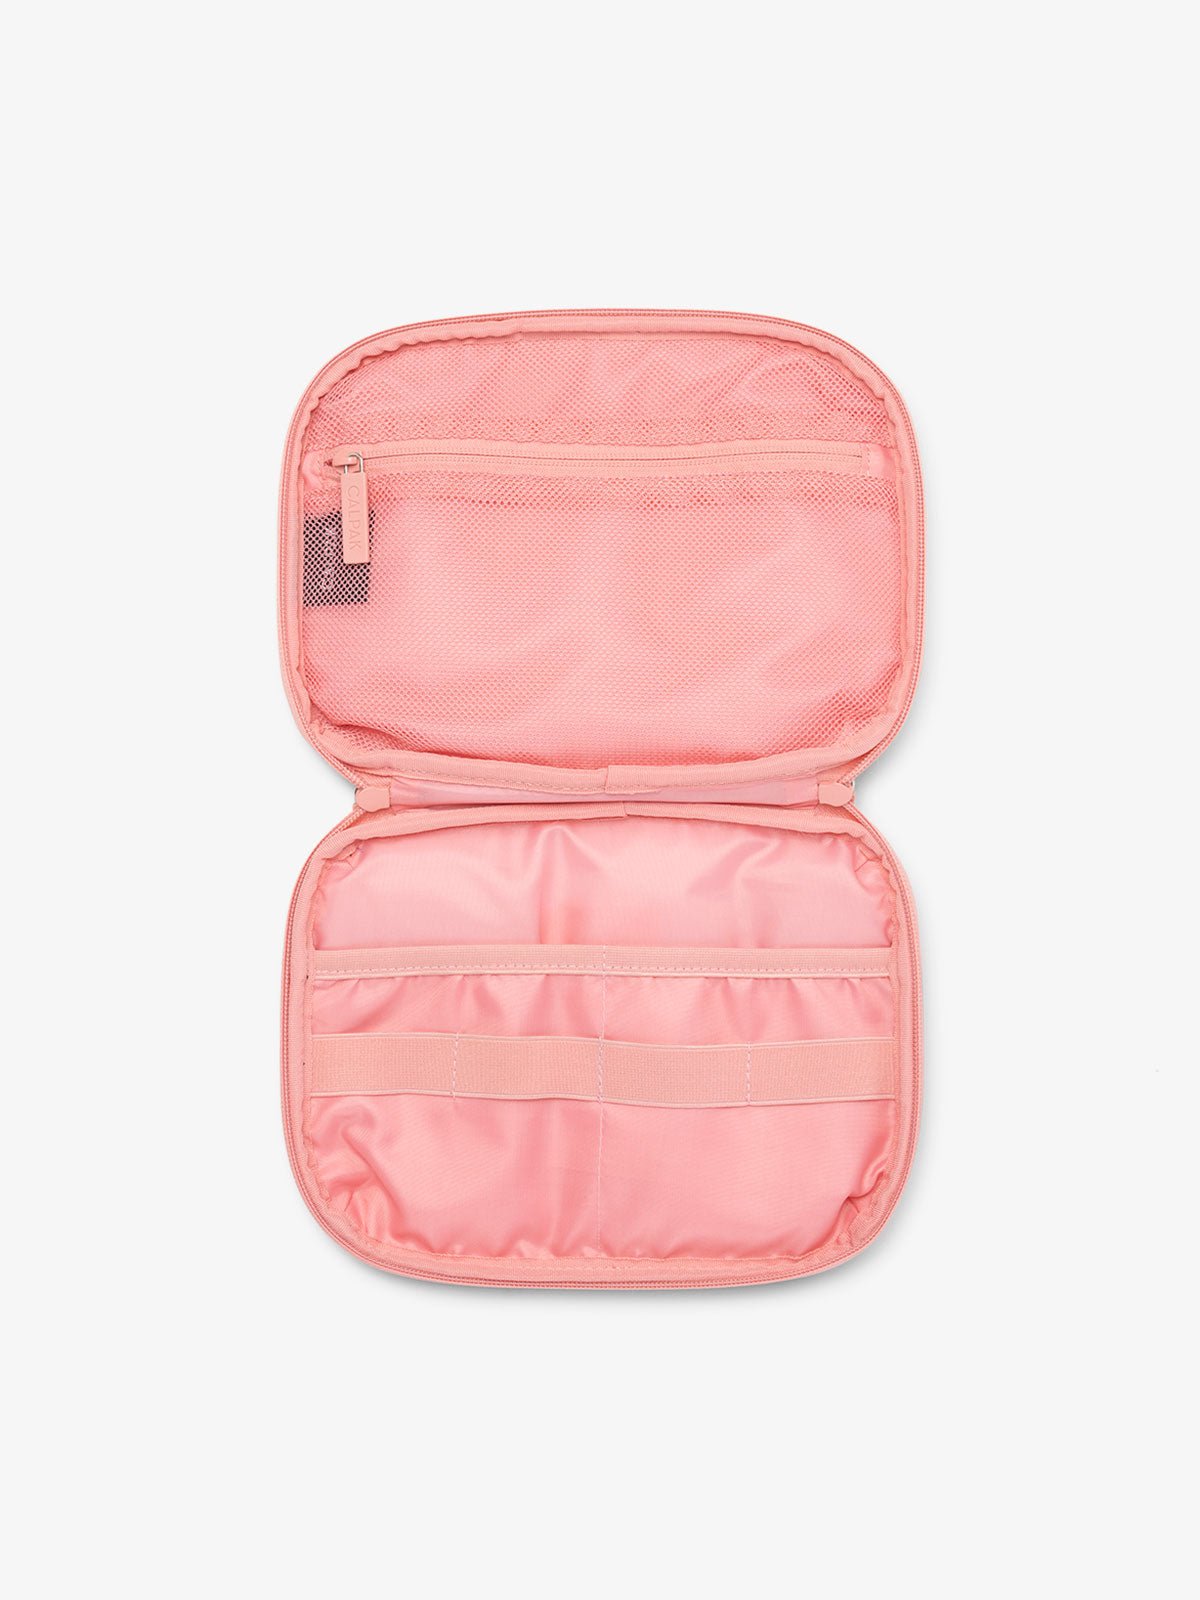 CALPAK tech and electronics organizer for travel in pink grid